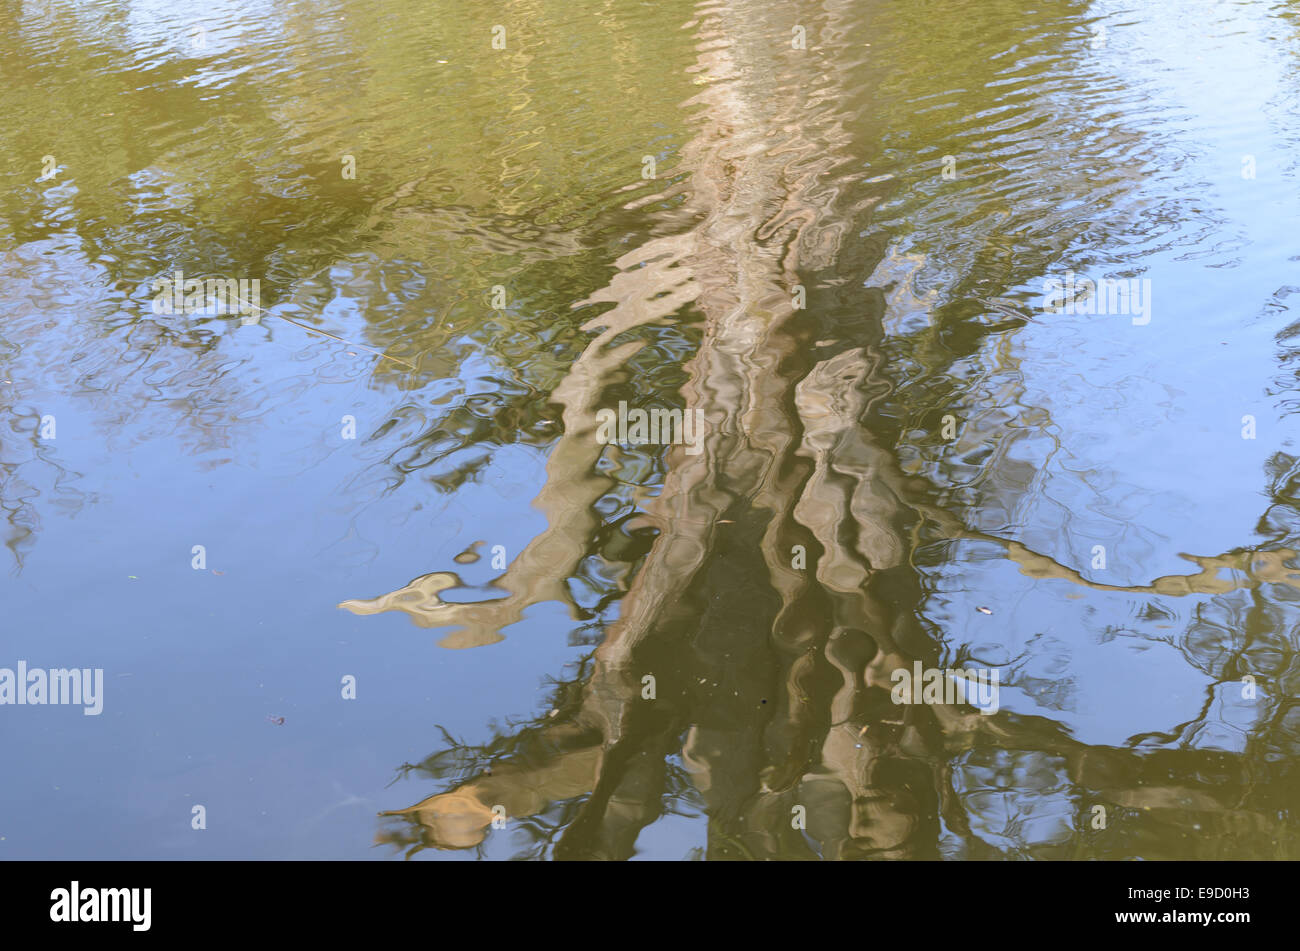 lovely colors in a photo of the reflection of a tree in rippling water Stock Photo